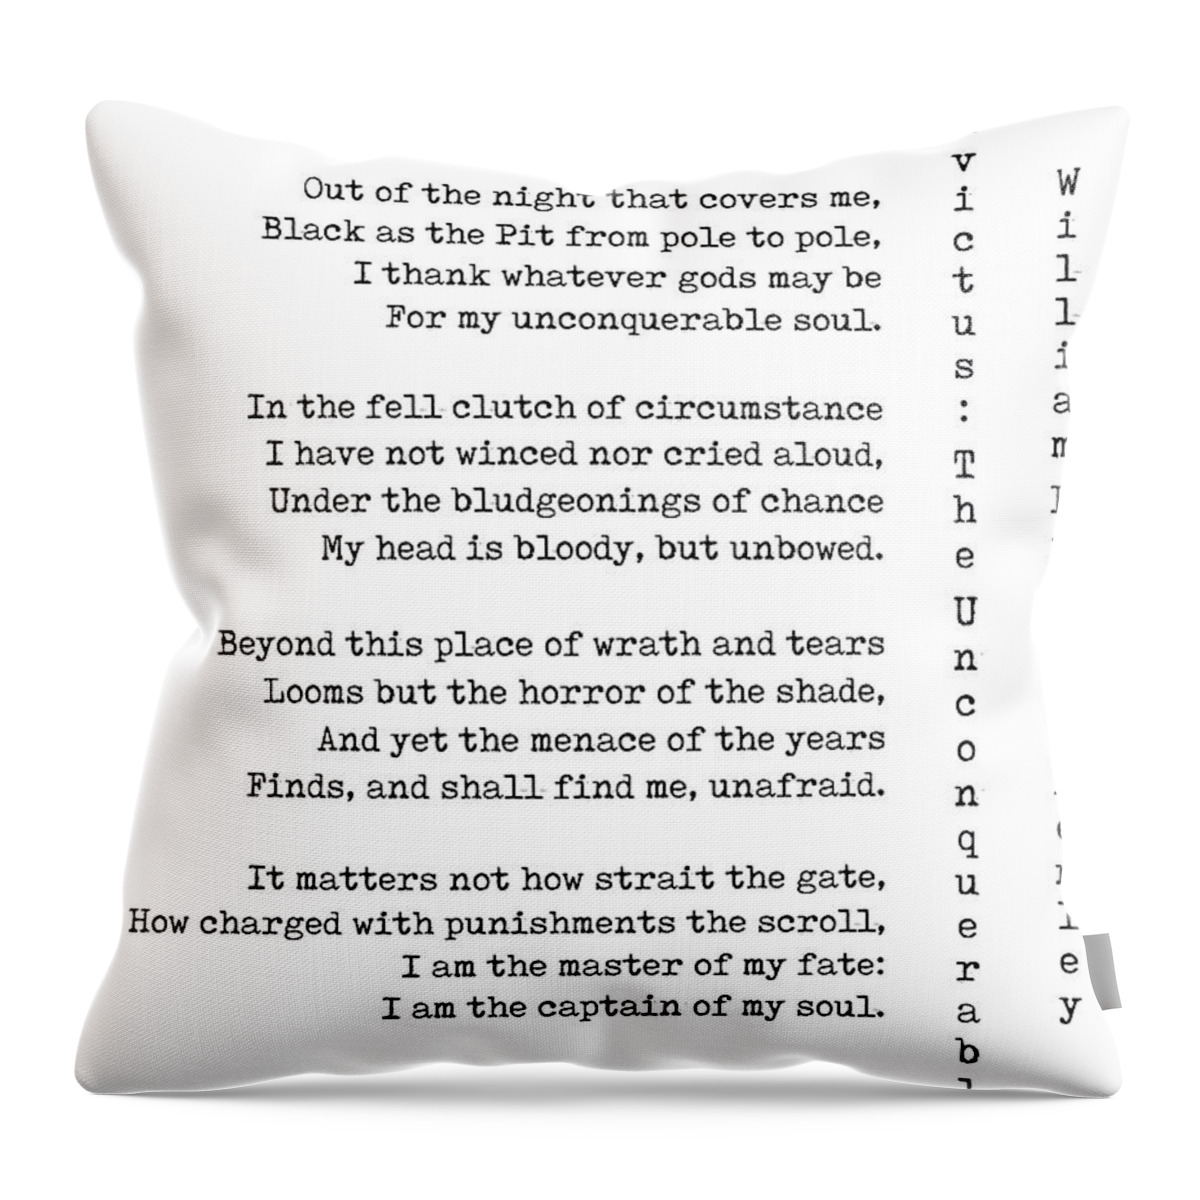 Invictus Throw Pillow featuring the digital art Invictus - The Unconquerable by William Ernest Henley - White by Georgia Clare